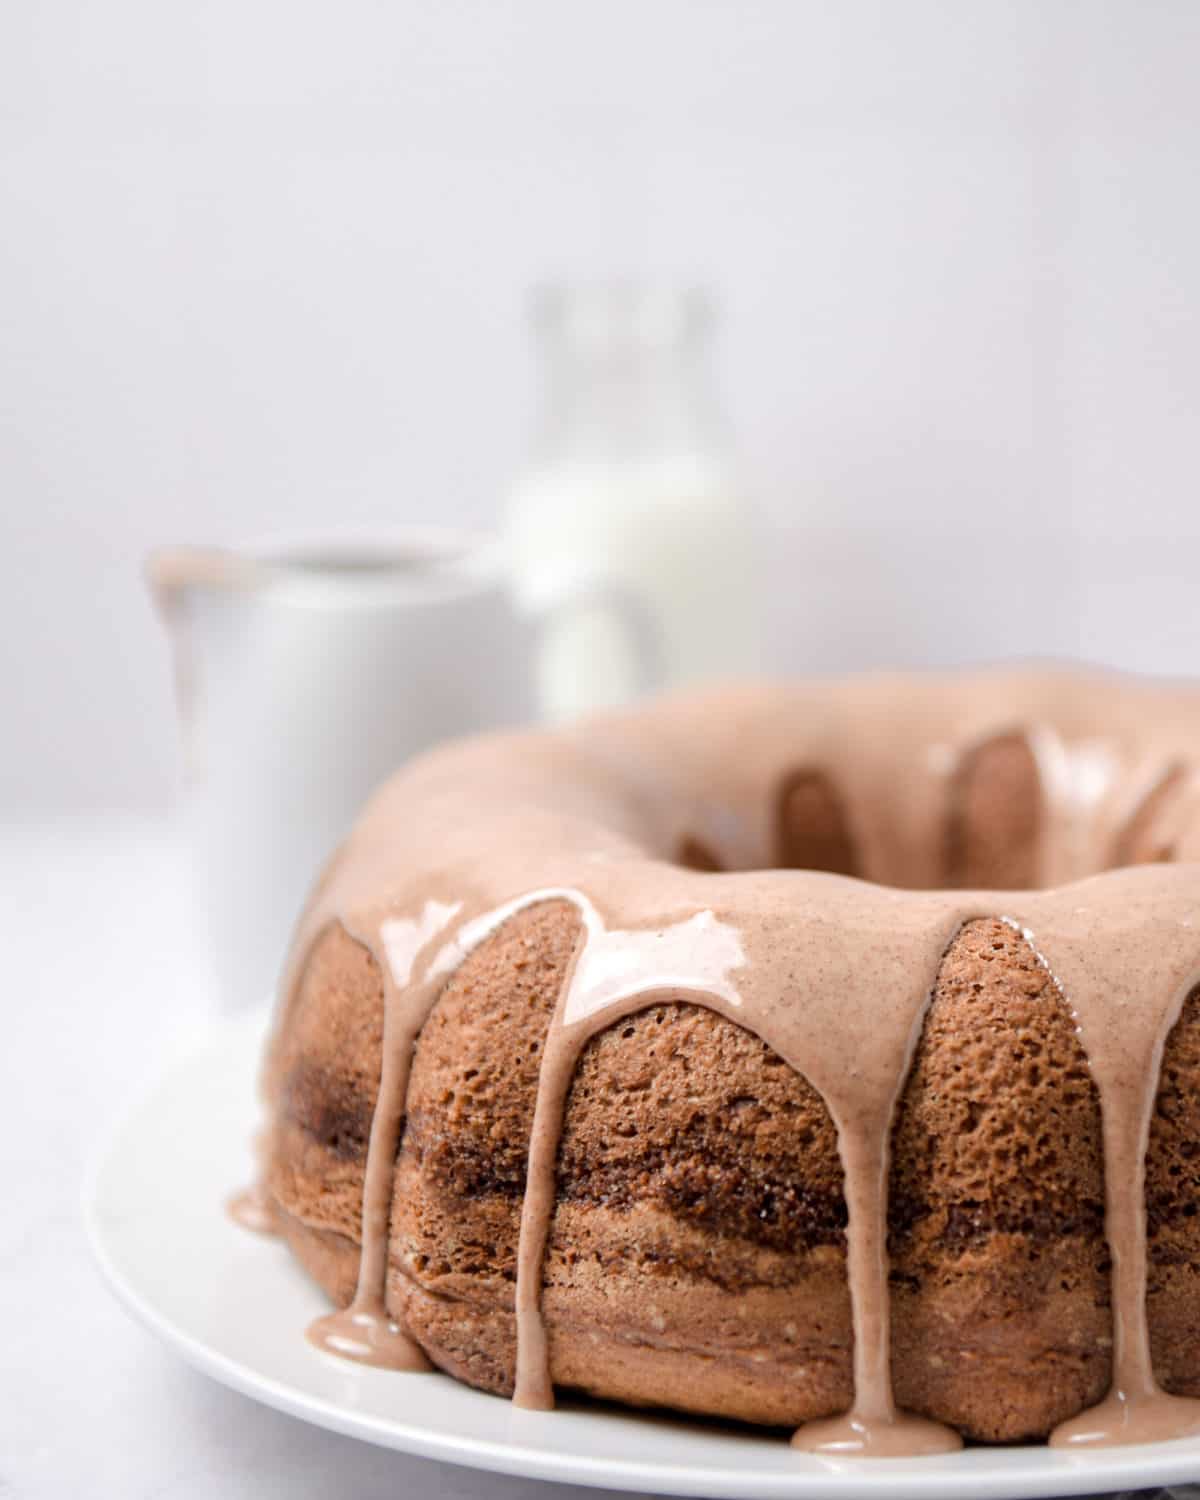 A shot of the side of a cinnamon Bundt cake.